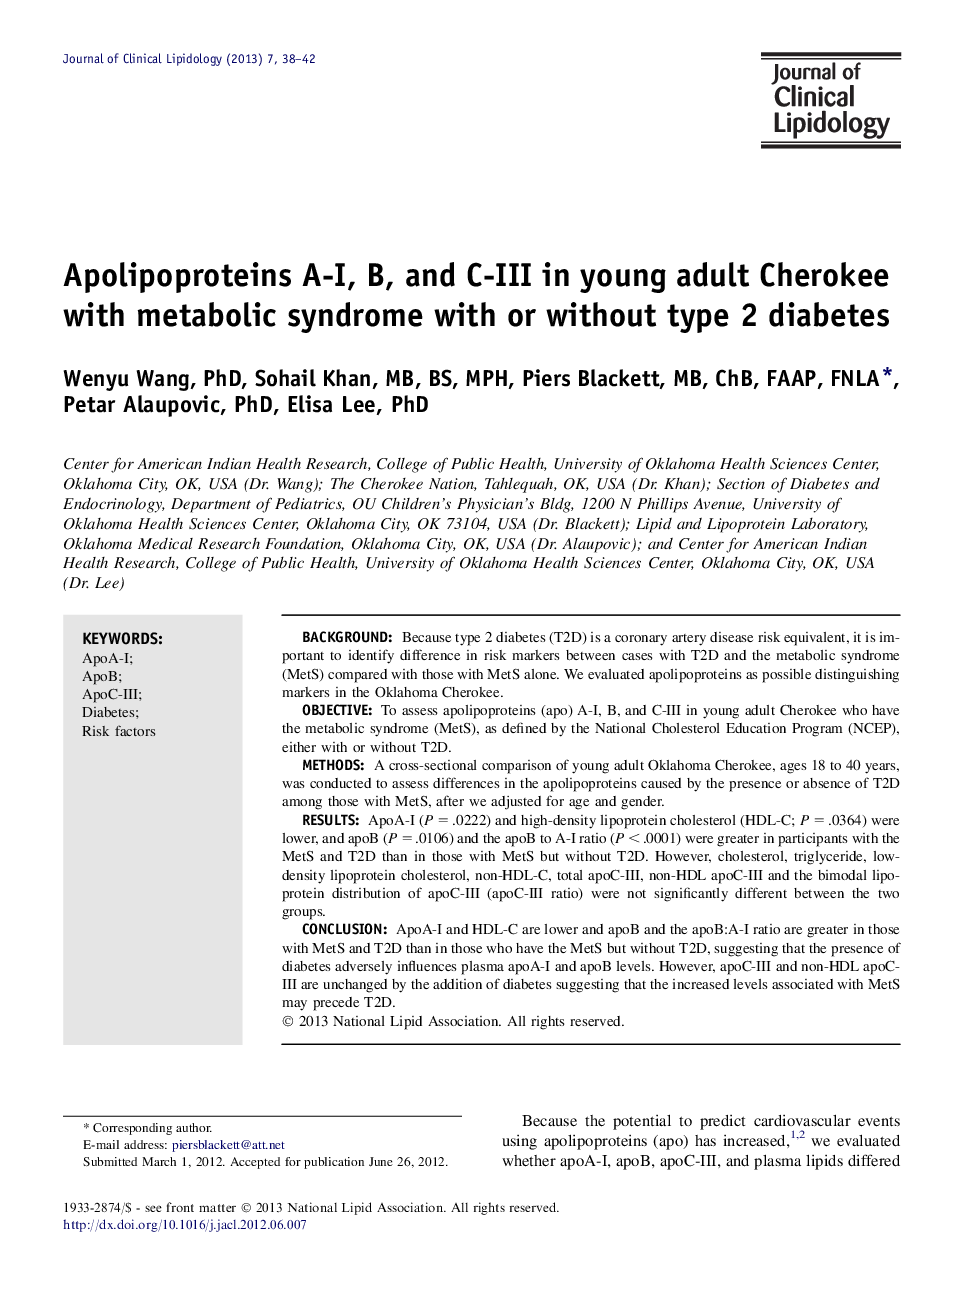 Apolipoproteins A-I, B, and C-III in young adult Cherokee with metabolic syndrome with or without type 2 diabetes